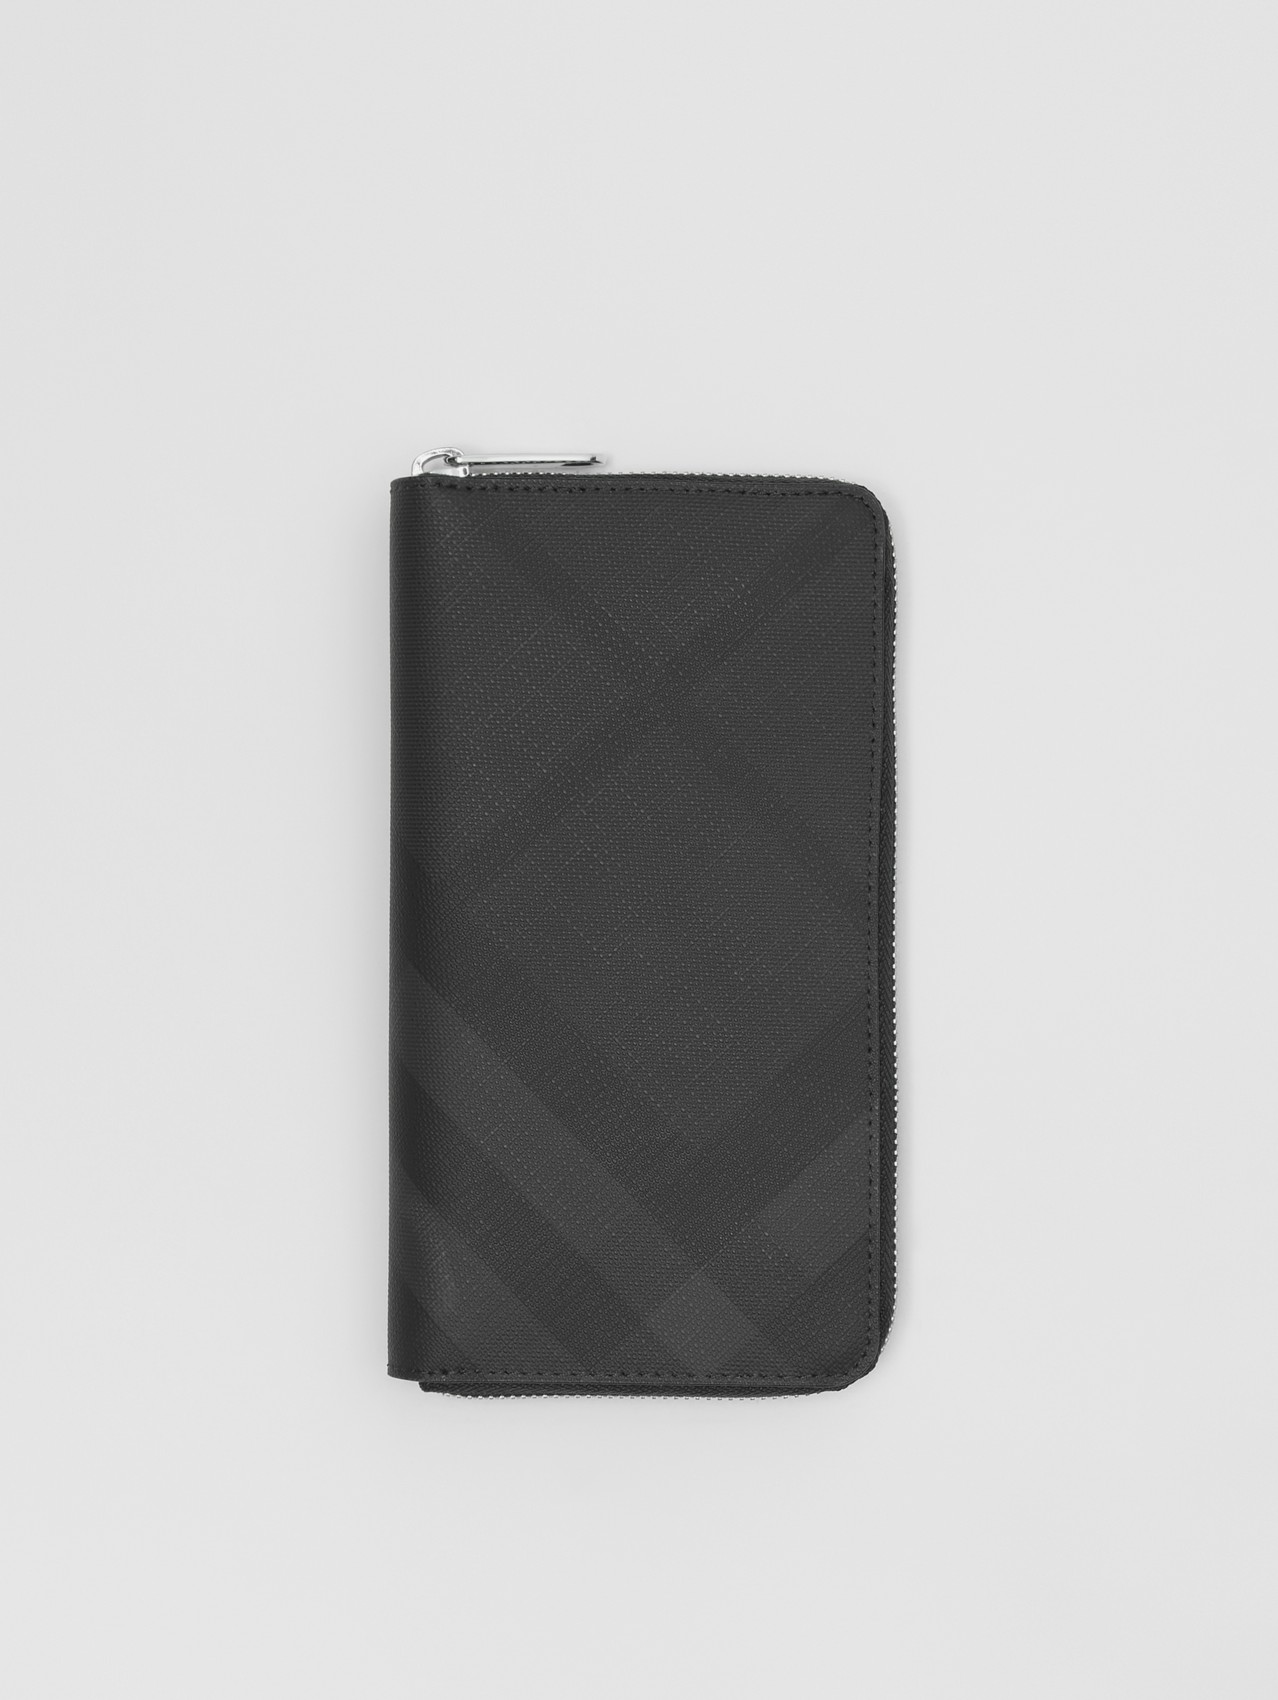 London Check and Leather Ziparound Wallet in Dark Charcoal